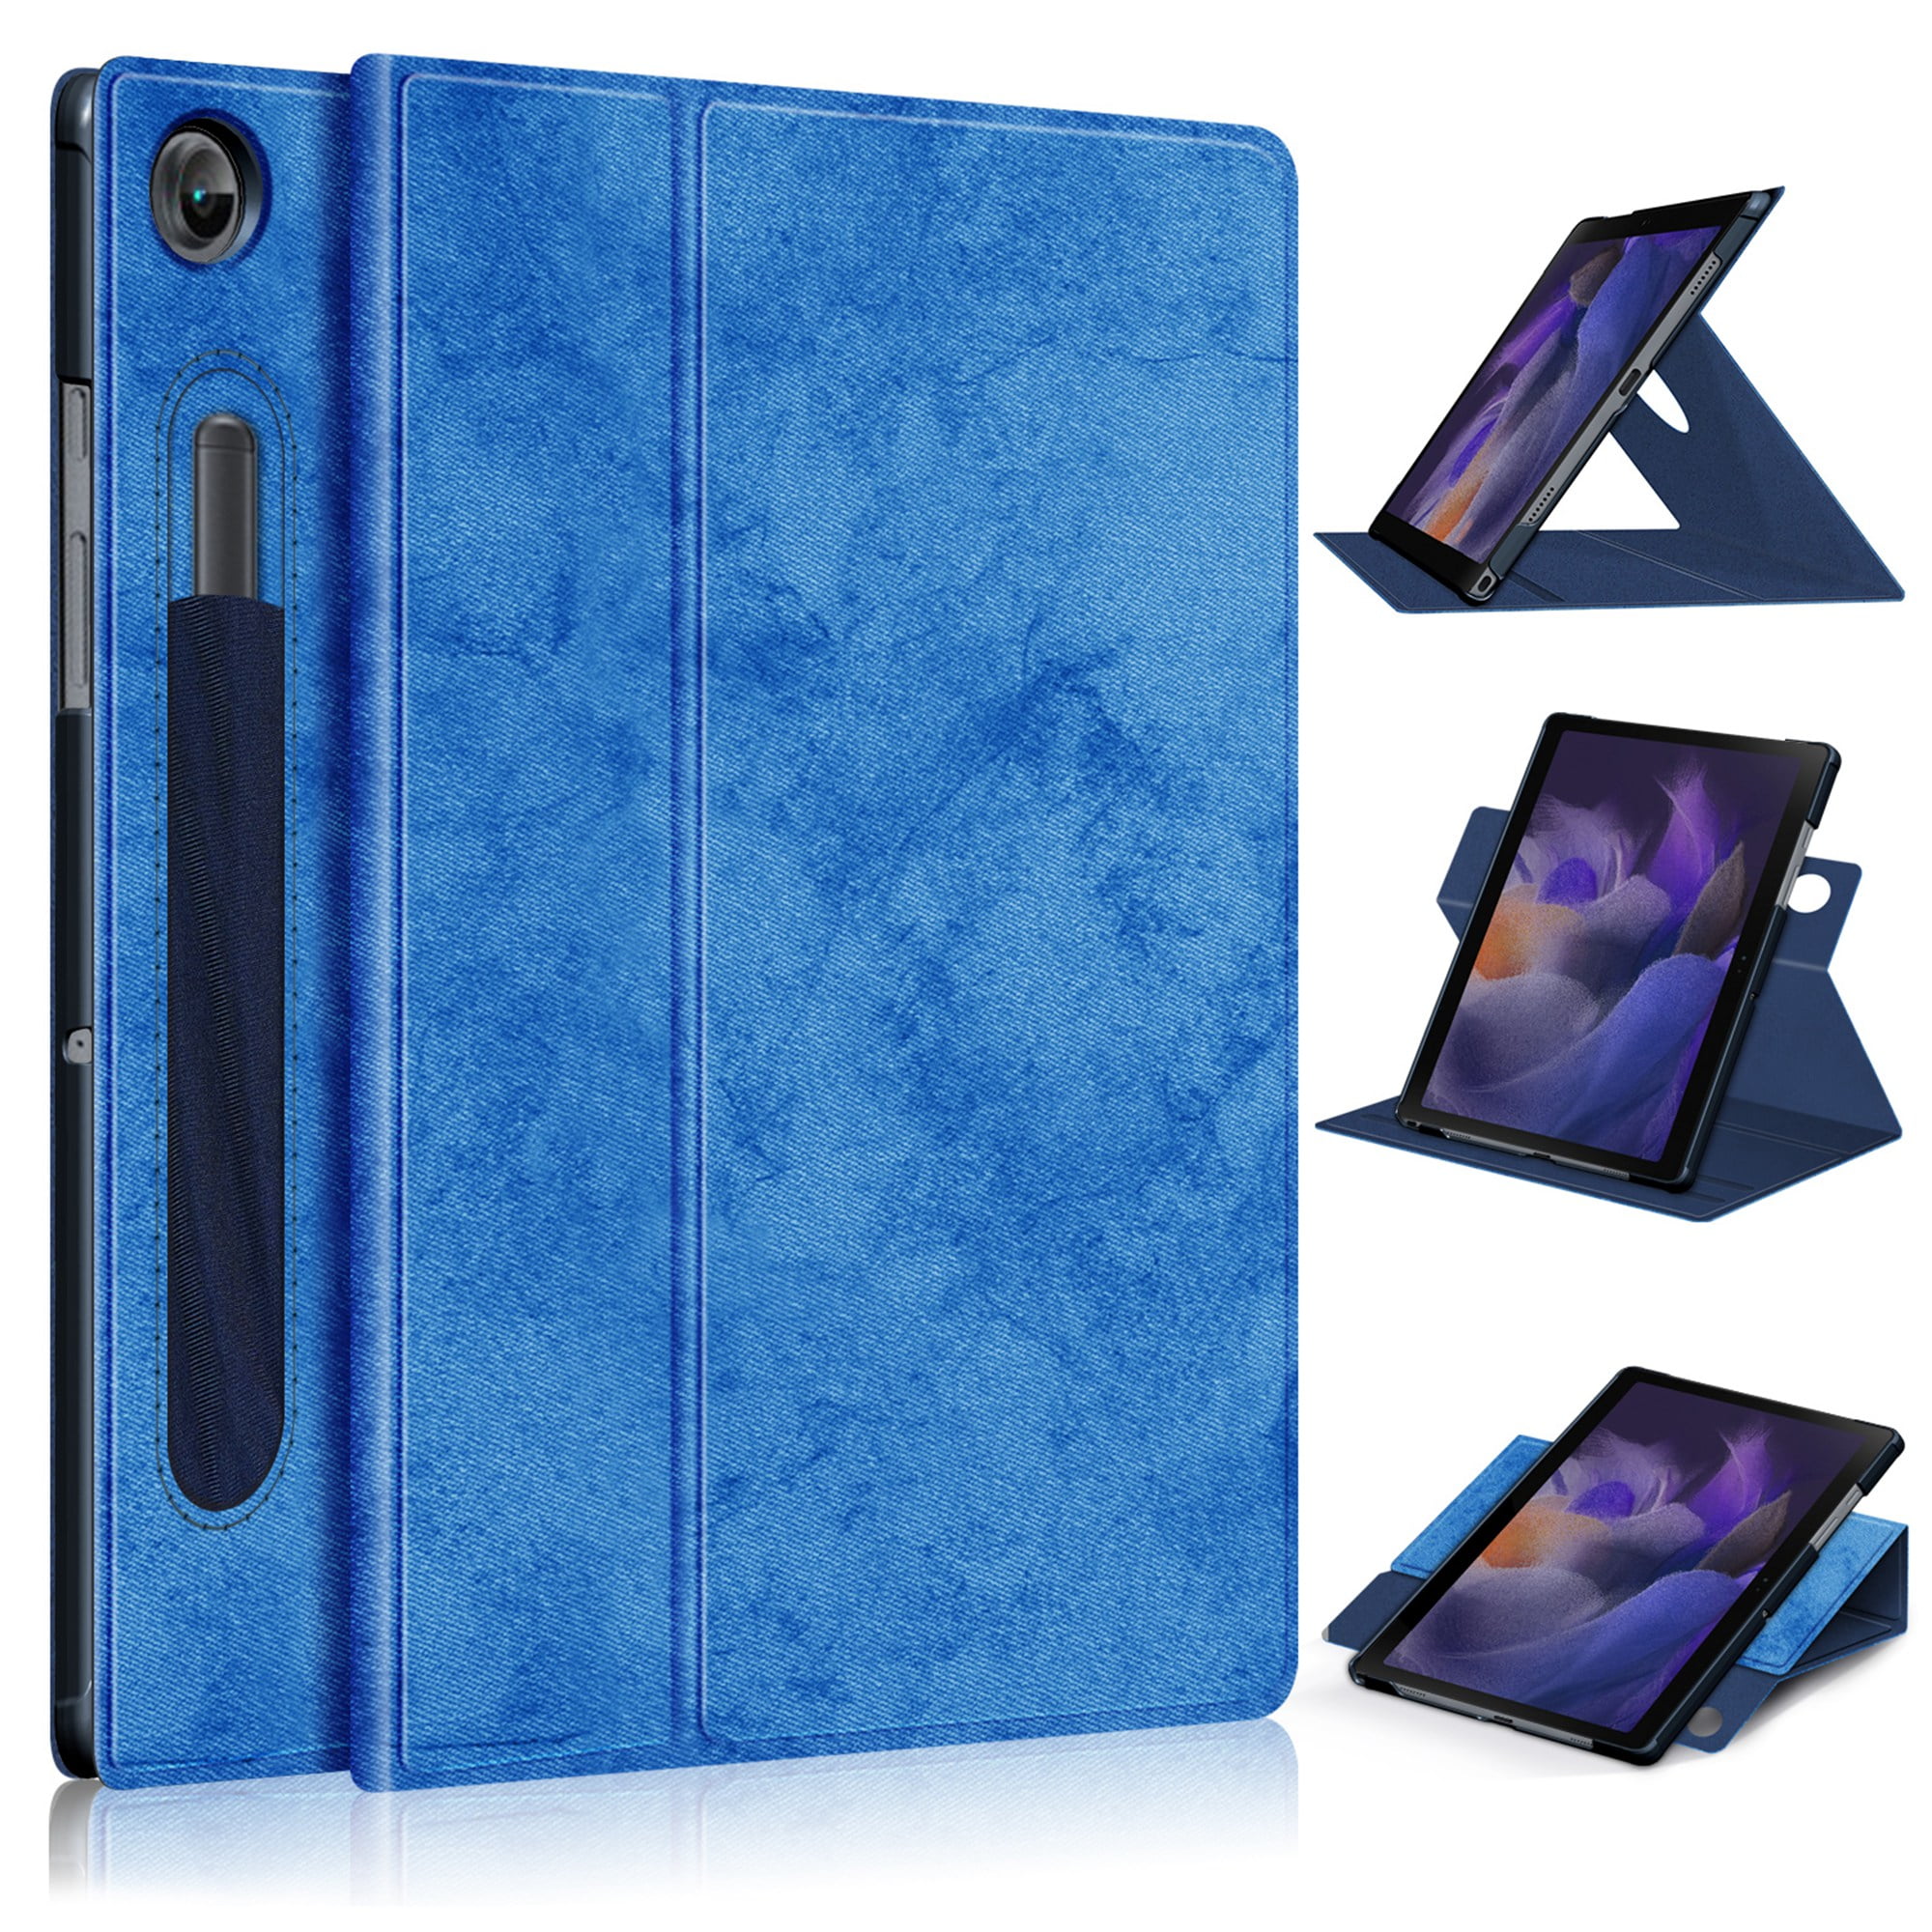 Handschrift ontwerper gastheer Galaxy Tab A8 (10.5") Case (SM-X200) - TECH CIRCLE Rotating Fold Stand  Folio Case Protective PU Leather Flip Cover with [Pencil Holder] for 2022 Samsung  Galaxy Tab A8 10.5-Inch Android Tablet,Darkblue -